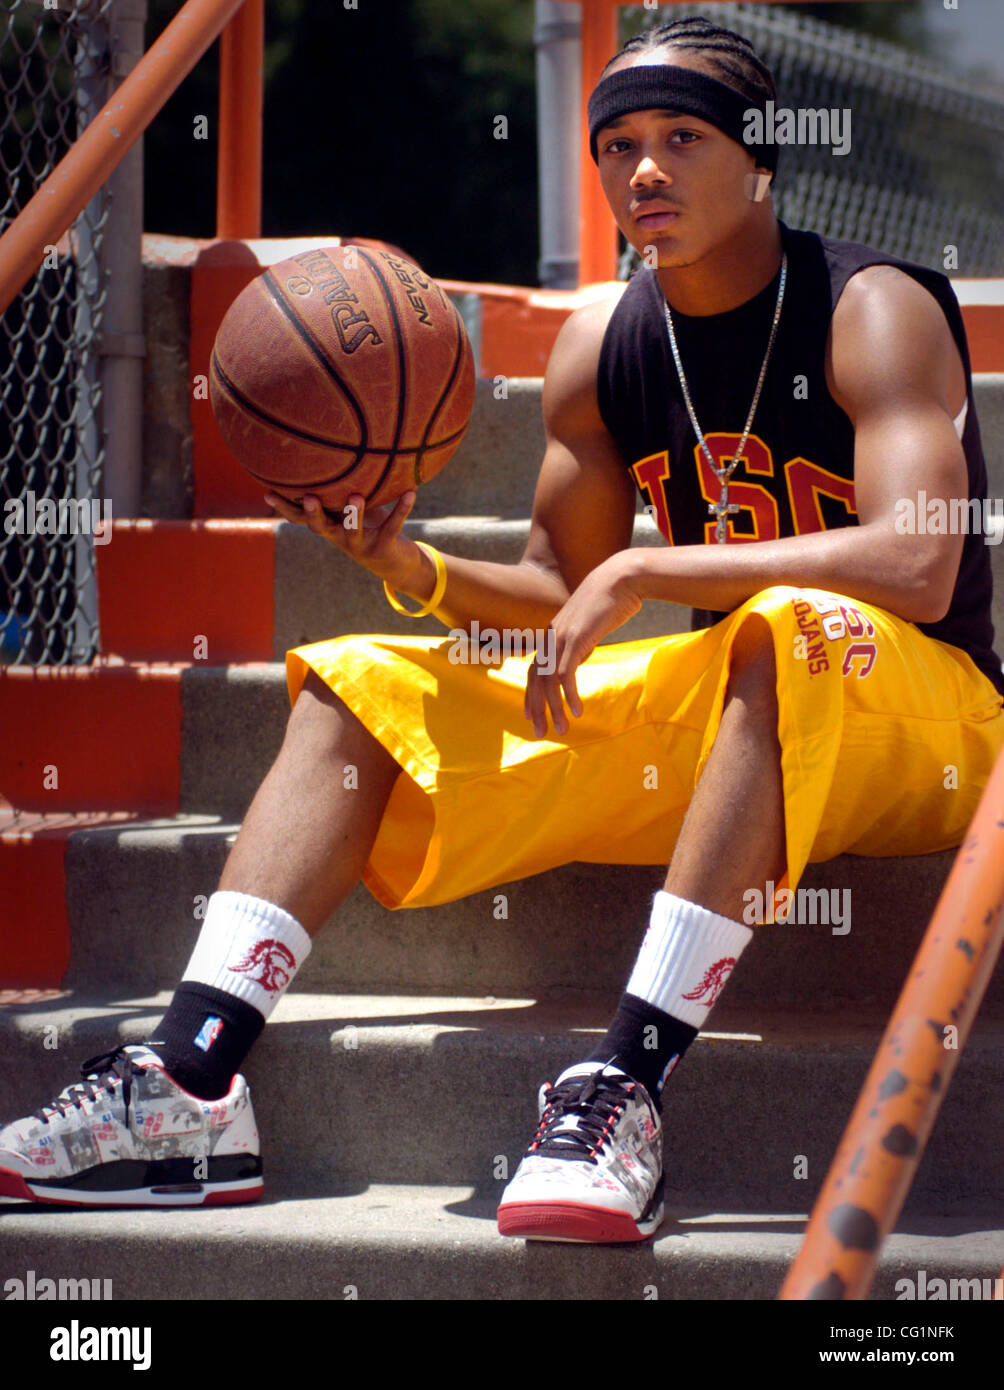 Romeo Miller, formerly known as rap star Lil Romeo, sits on the steps at  Beverly Hills high school in Beverly Hills Ca. Friday afternoon June 23,  2007. Miller, who will be a